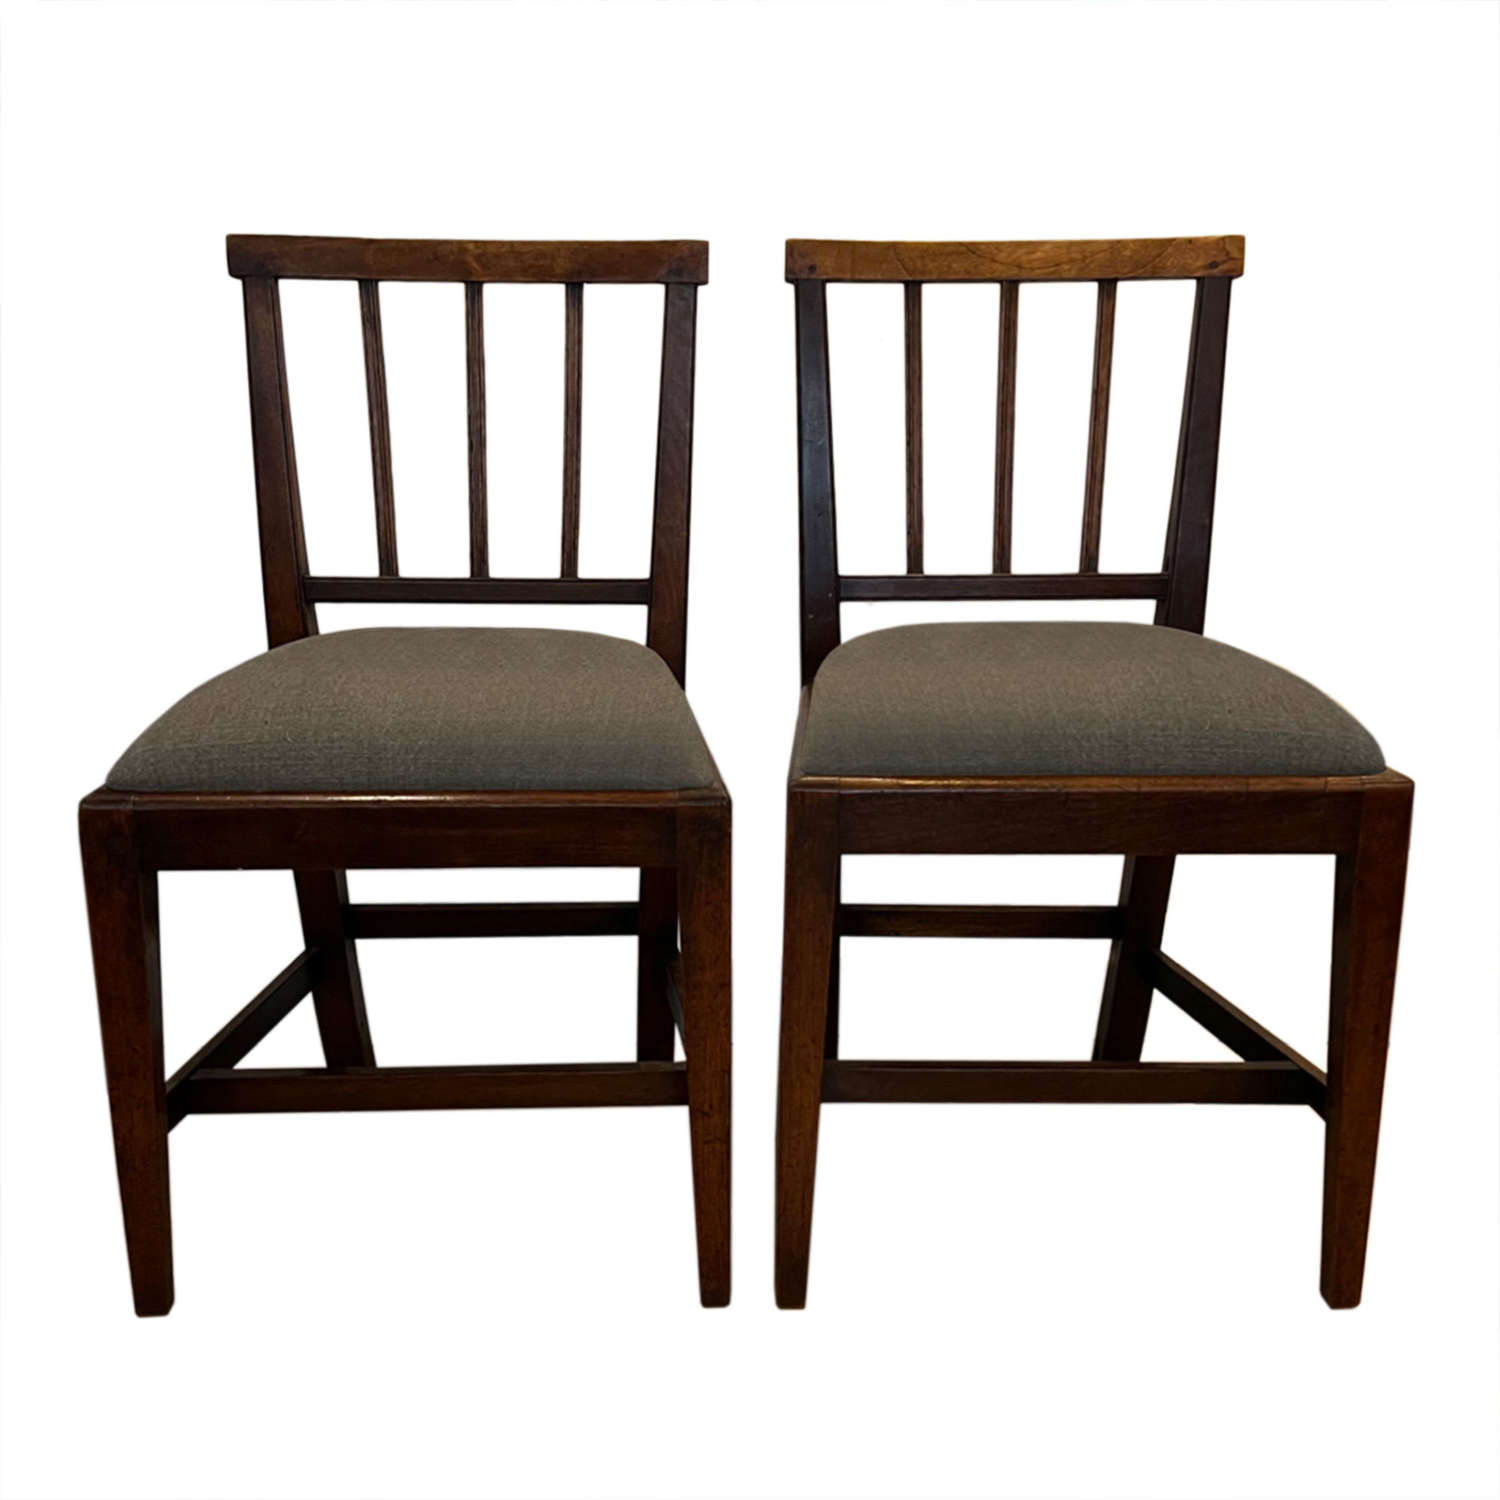 Pair of Upholstered 18th Century Chairs